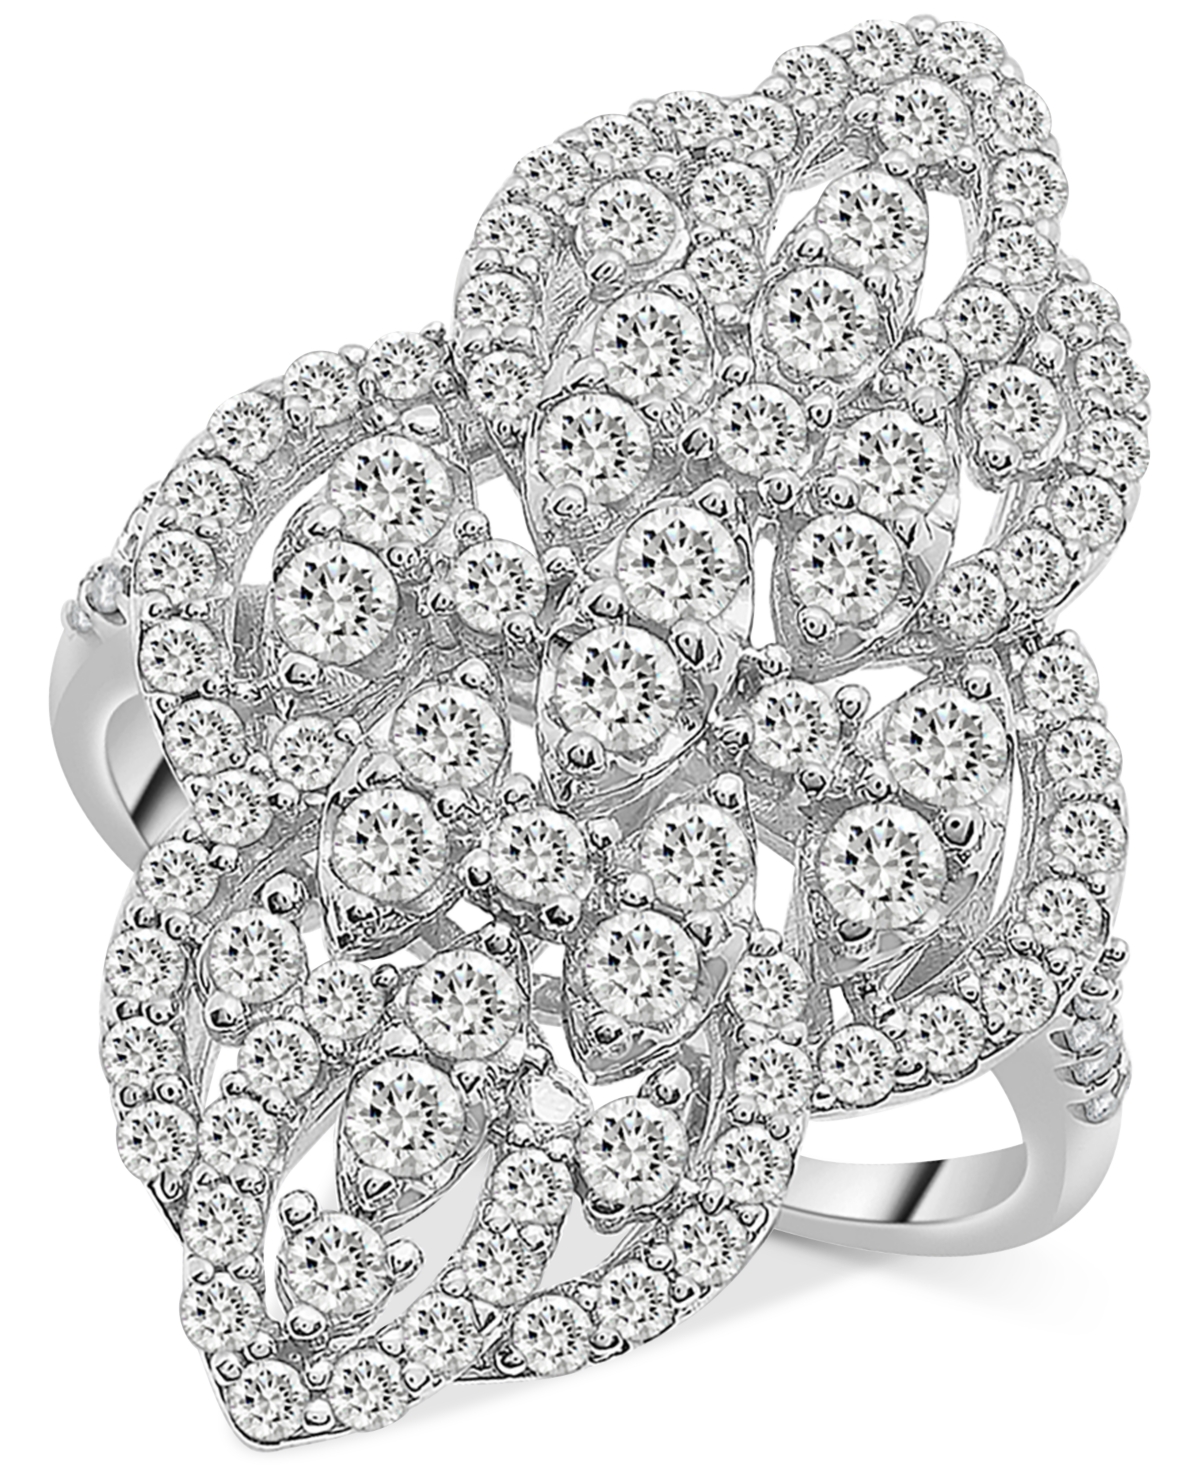 Diamond Filigree Cluster Ring (1-1/2 ct. t.w.) in 14k White Gold or 14k Yellow Gold, Created for Macy's - Yellow Gold